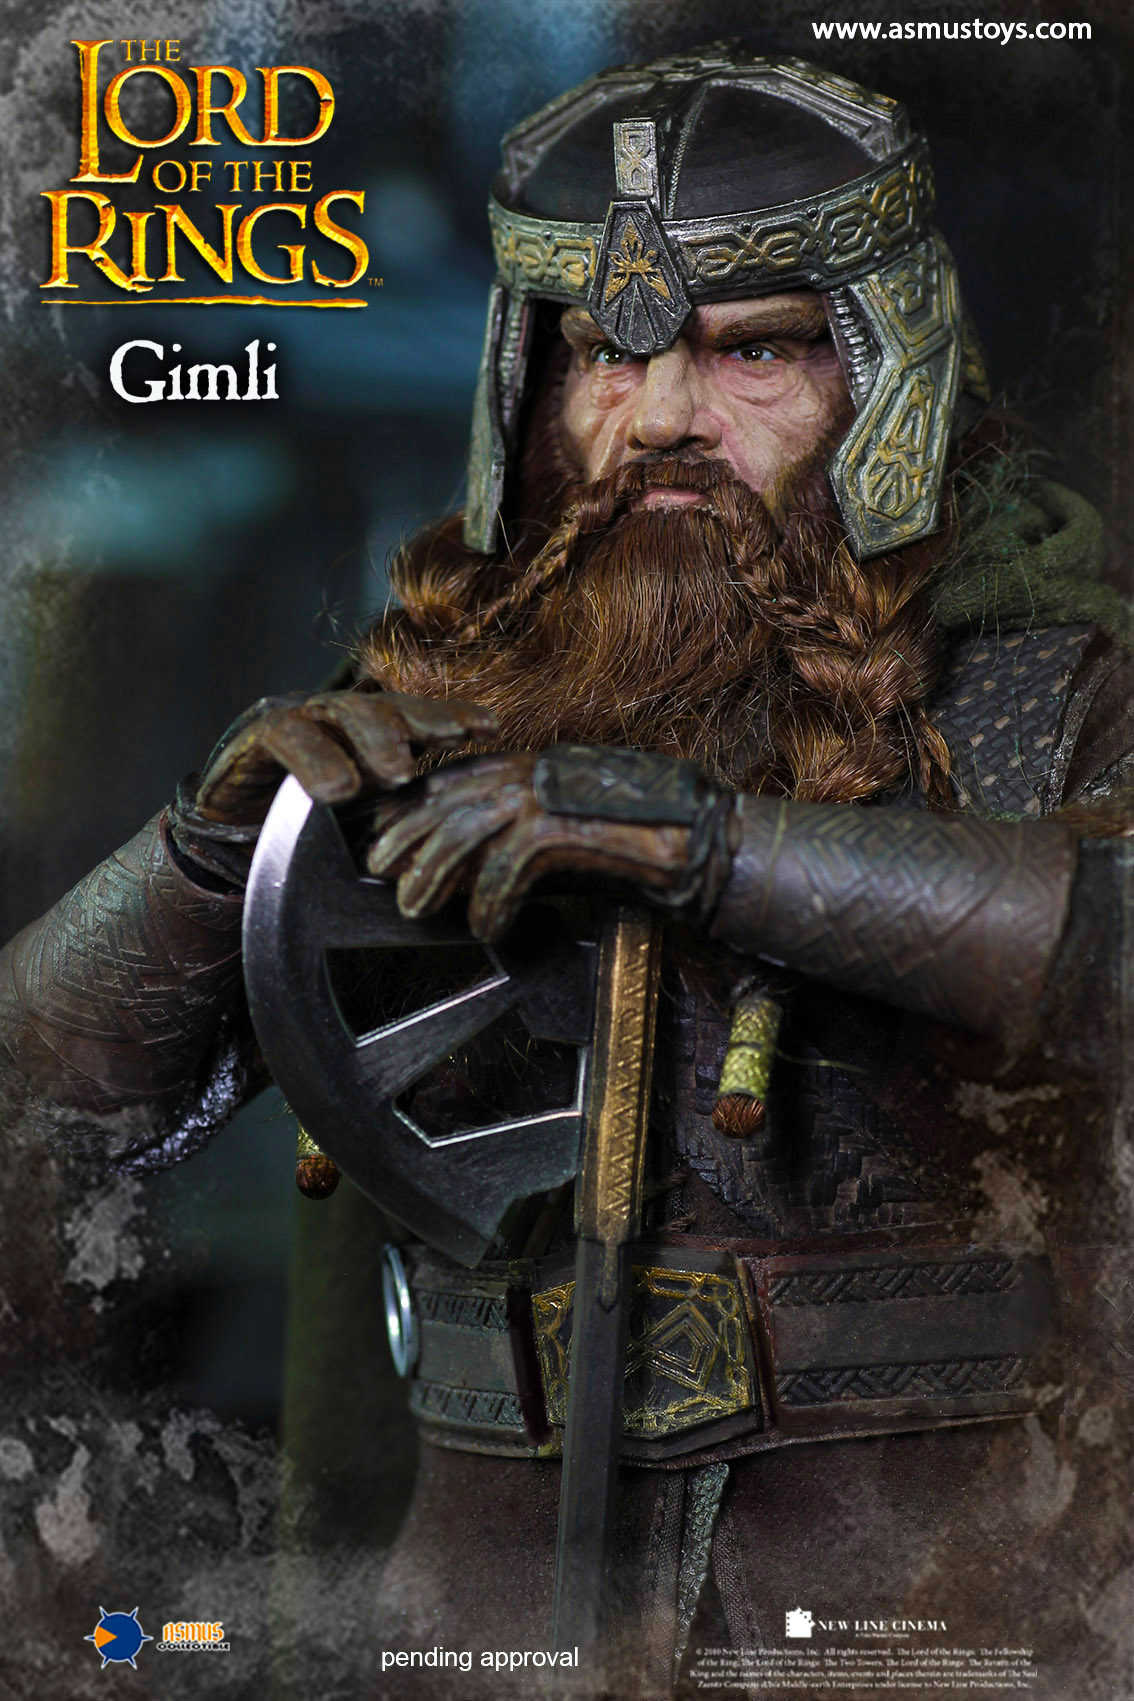 Gimli 1/6 - The Lord Of The Rings (Asmus Toys) HfyHCjnM_o